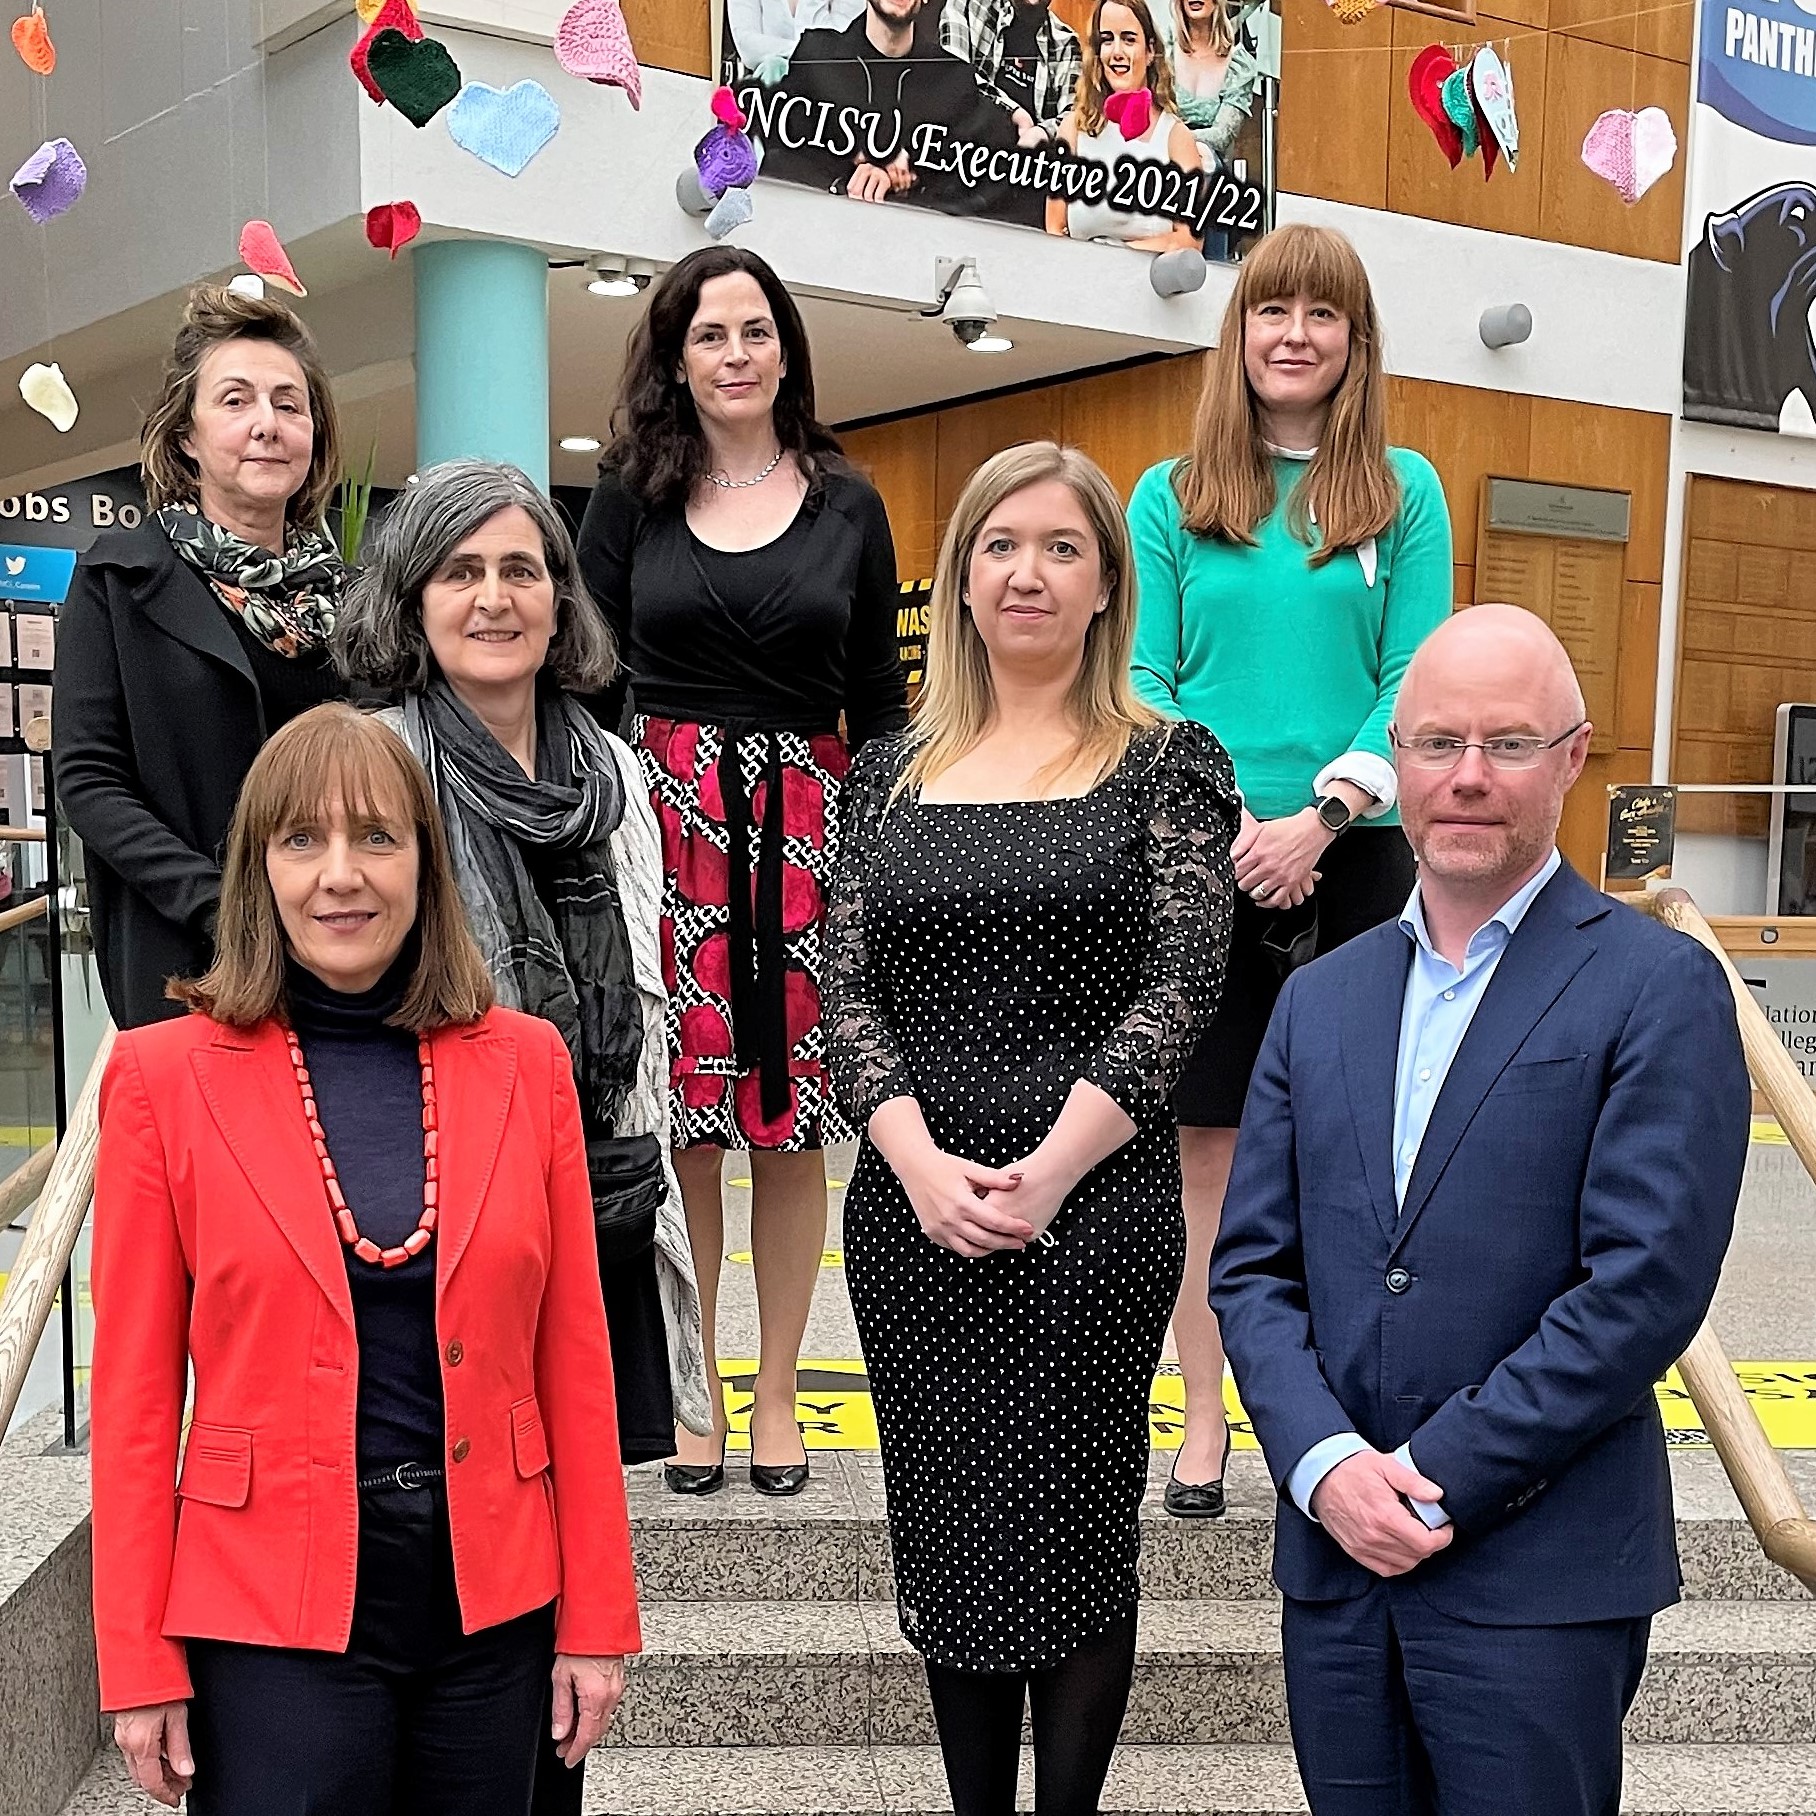 Minister for Health Stephen Donnelly with Gina Quin, president of NCI and representatives of the Community Families programme